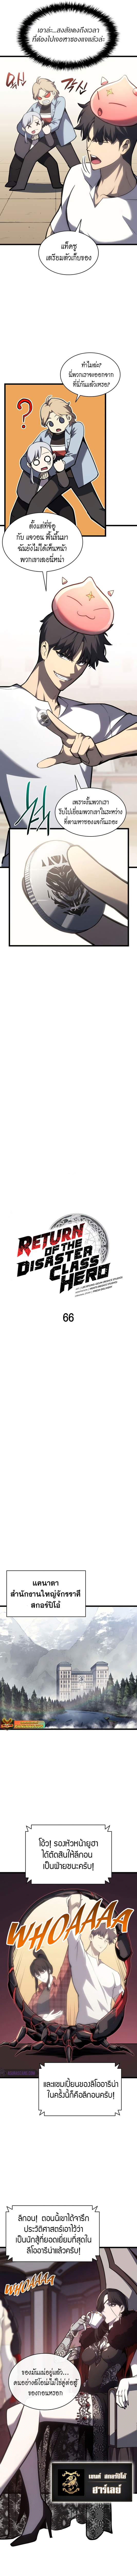 The Return of The Disaster Class Hero 66 (3)